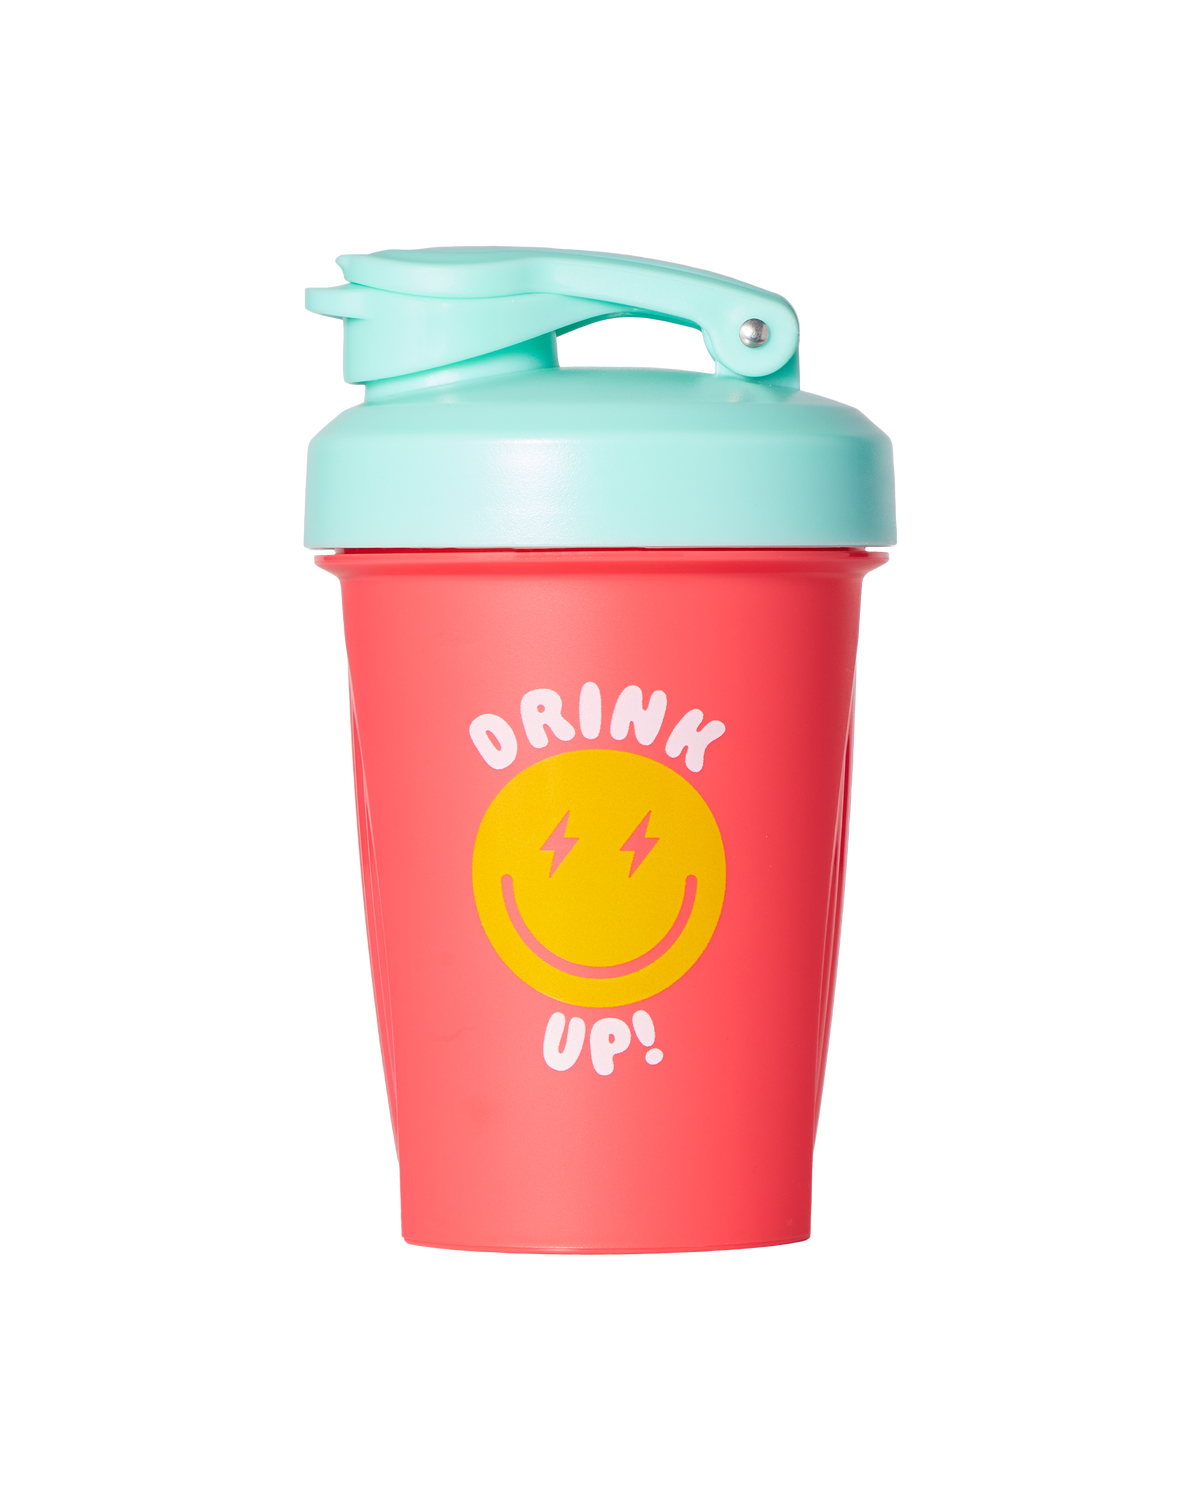 An Alani Nu 12oz Shaker in Electric Smiles with a smiley face on it.